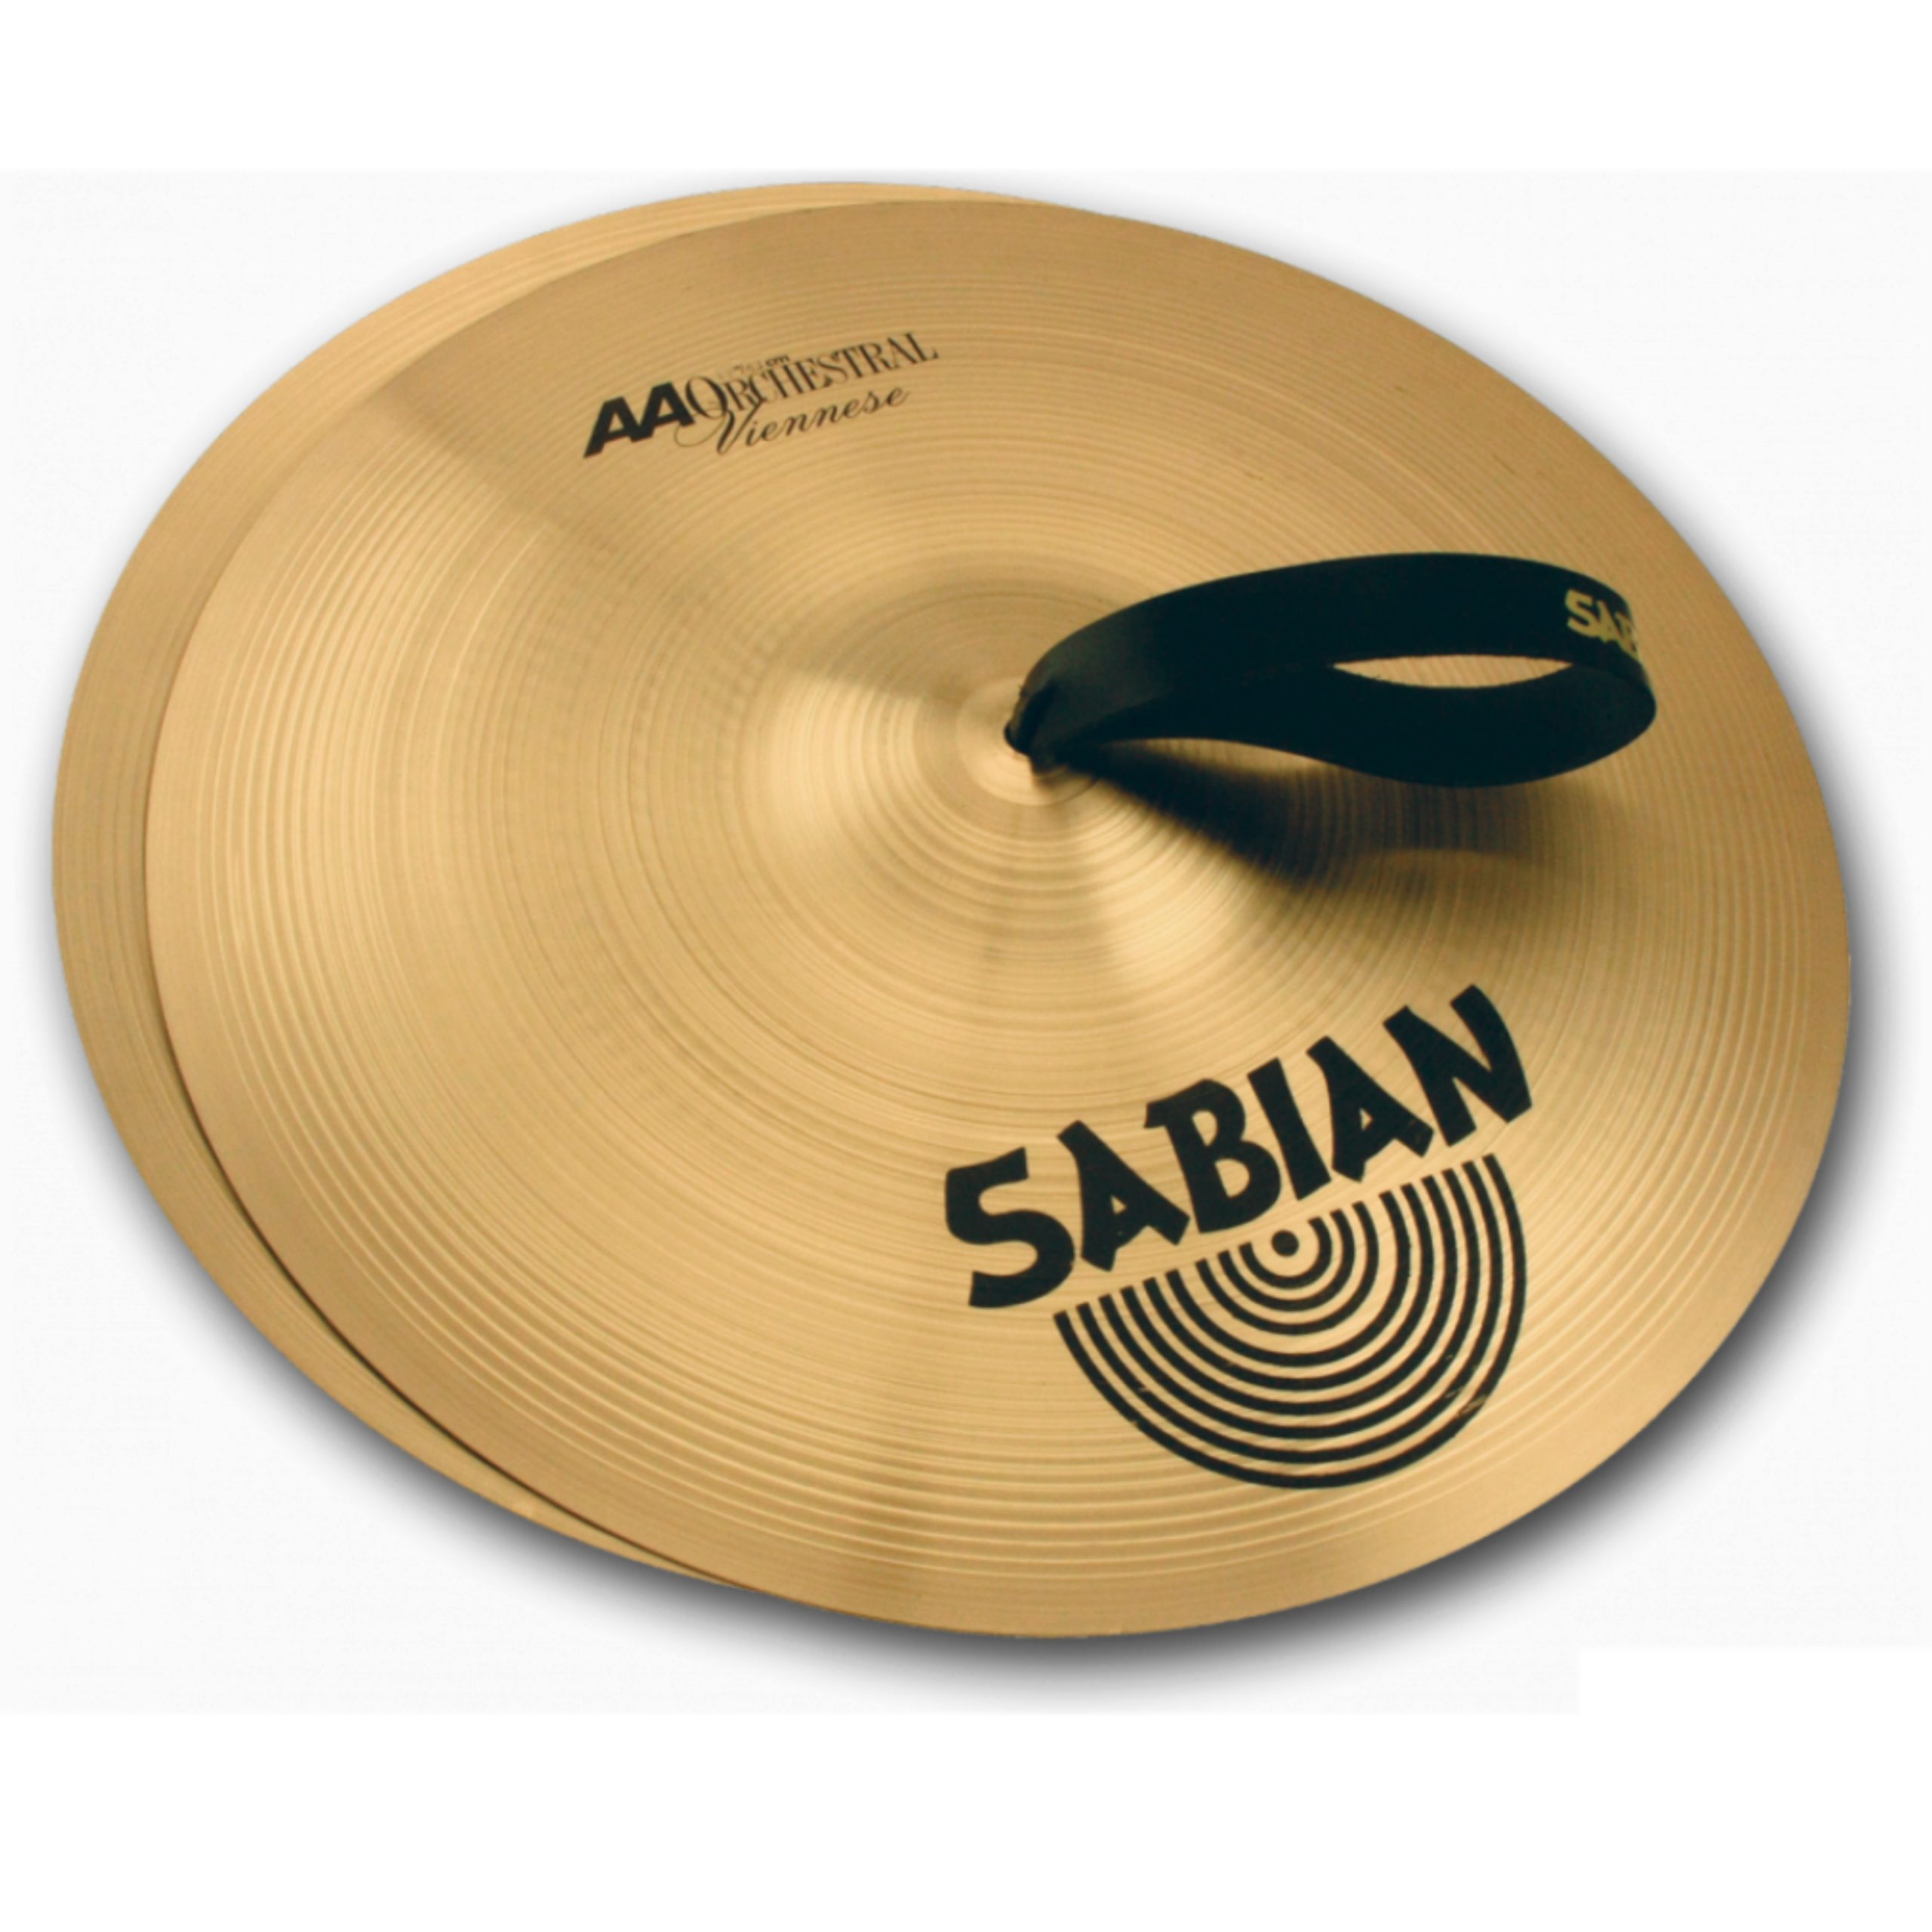 Sabian 19" AA Orchestral-Band Viennese pair